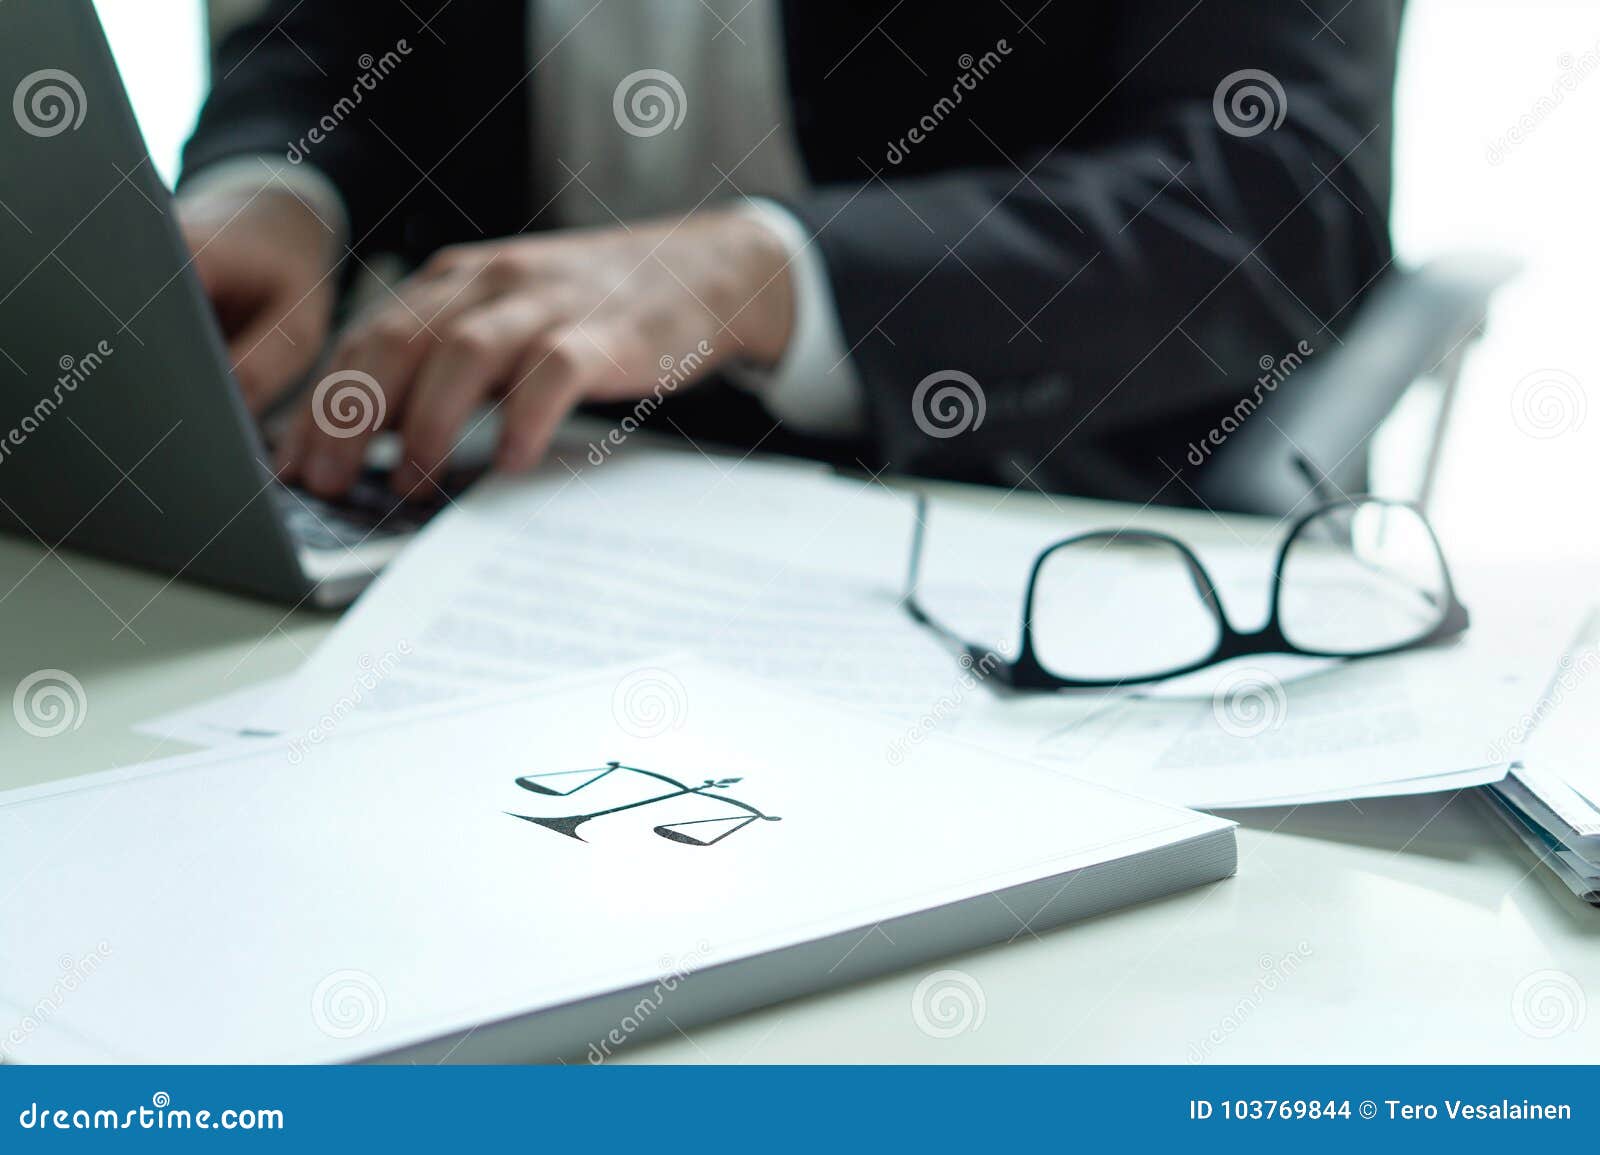 lawyer working in office. attorney writing a legal document.